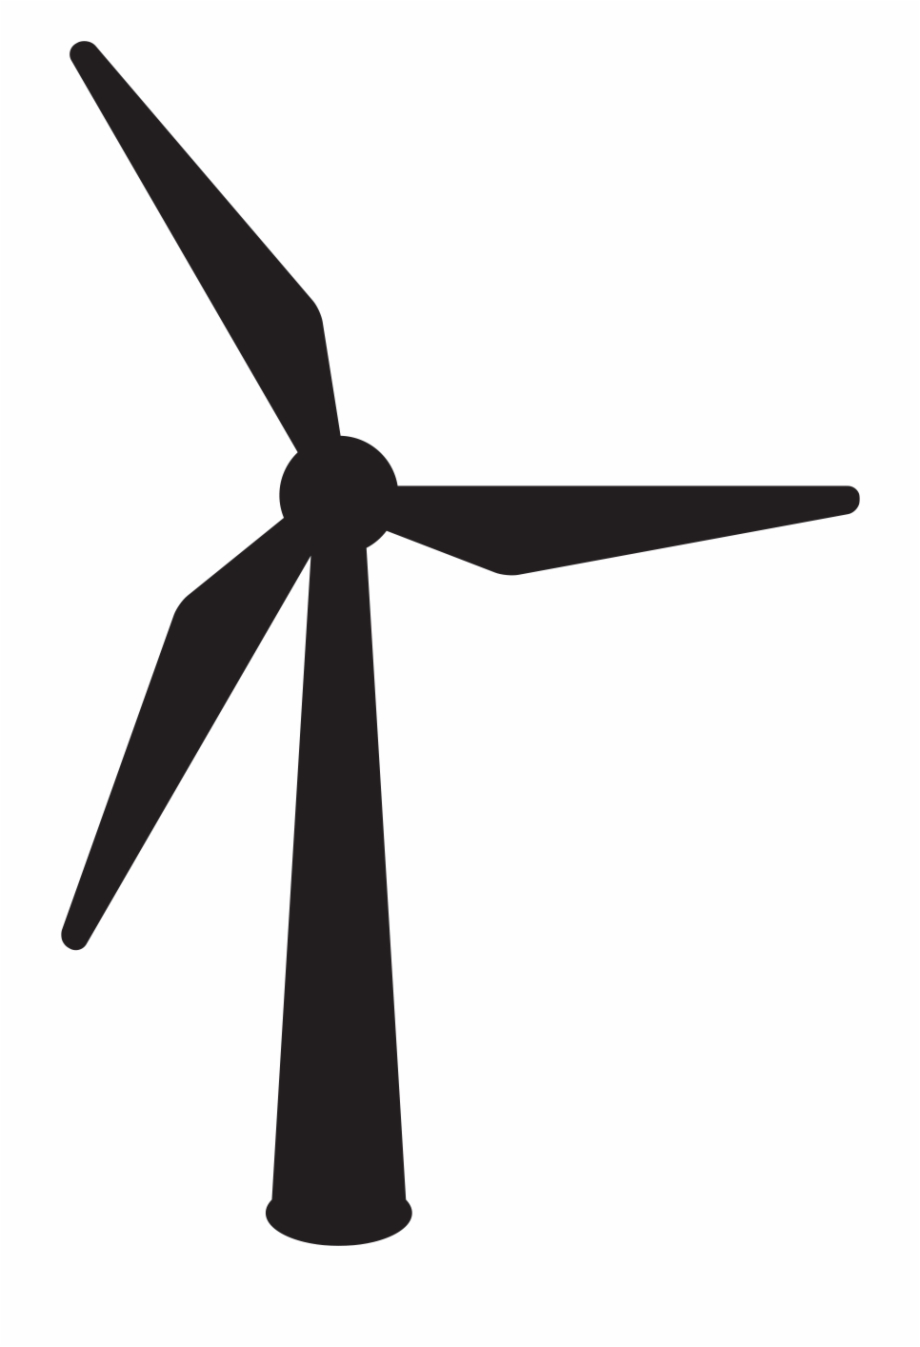 wind energy clipart black and white hearts